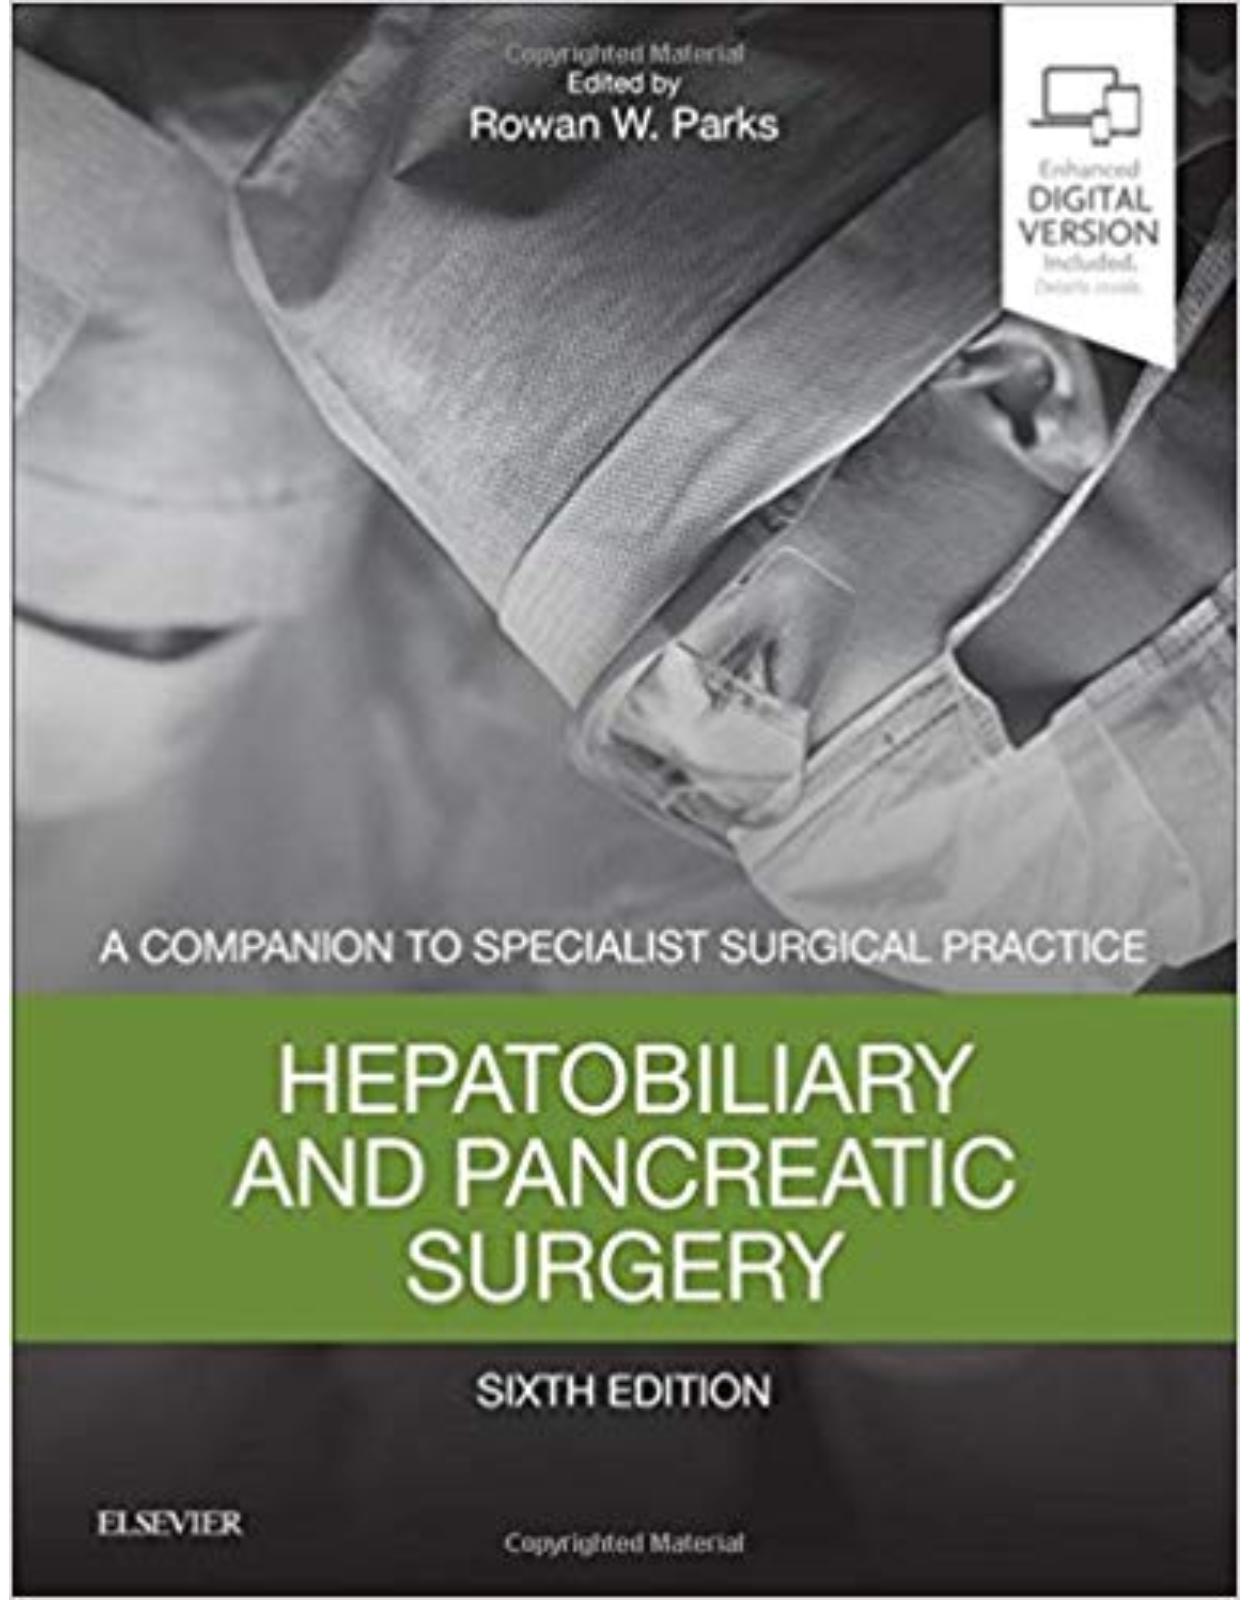 Hepatobiliary and Pancreatic Surgery: A Companion to Specialist Surgical Practice, 6e